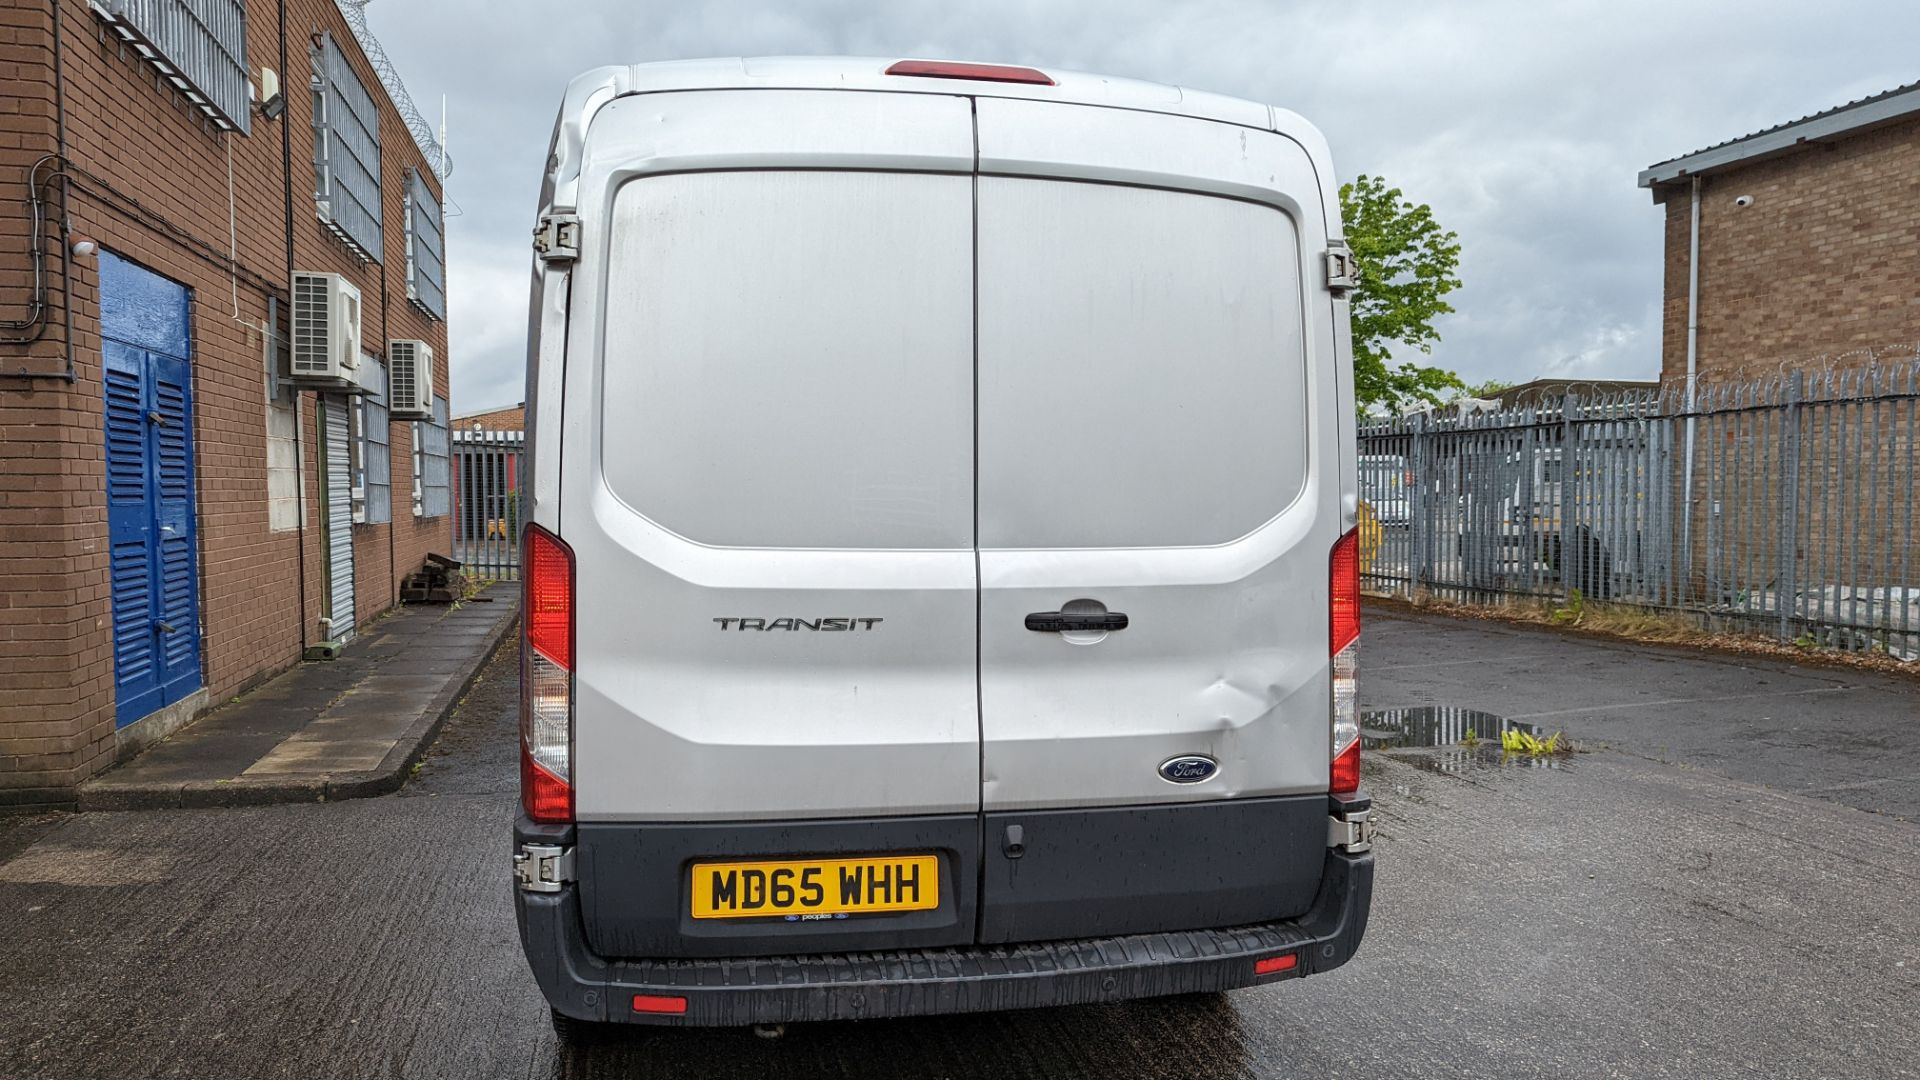 MD65 WHH Ford Transit 350, 6-speed manual gearbox, 2198cc diesel engine, 5981mm x 2550mm. Colour: Si - Image 19 of 51